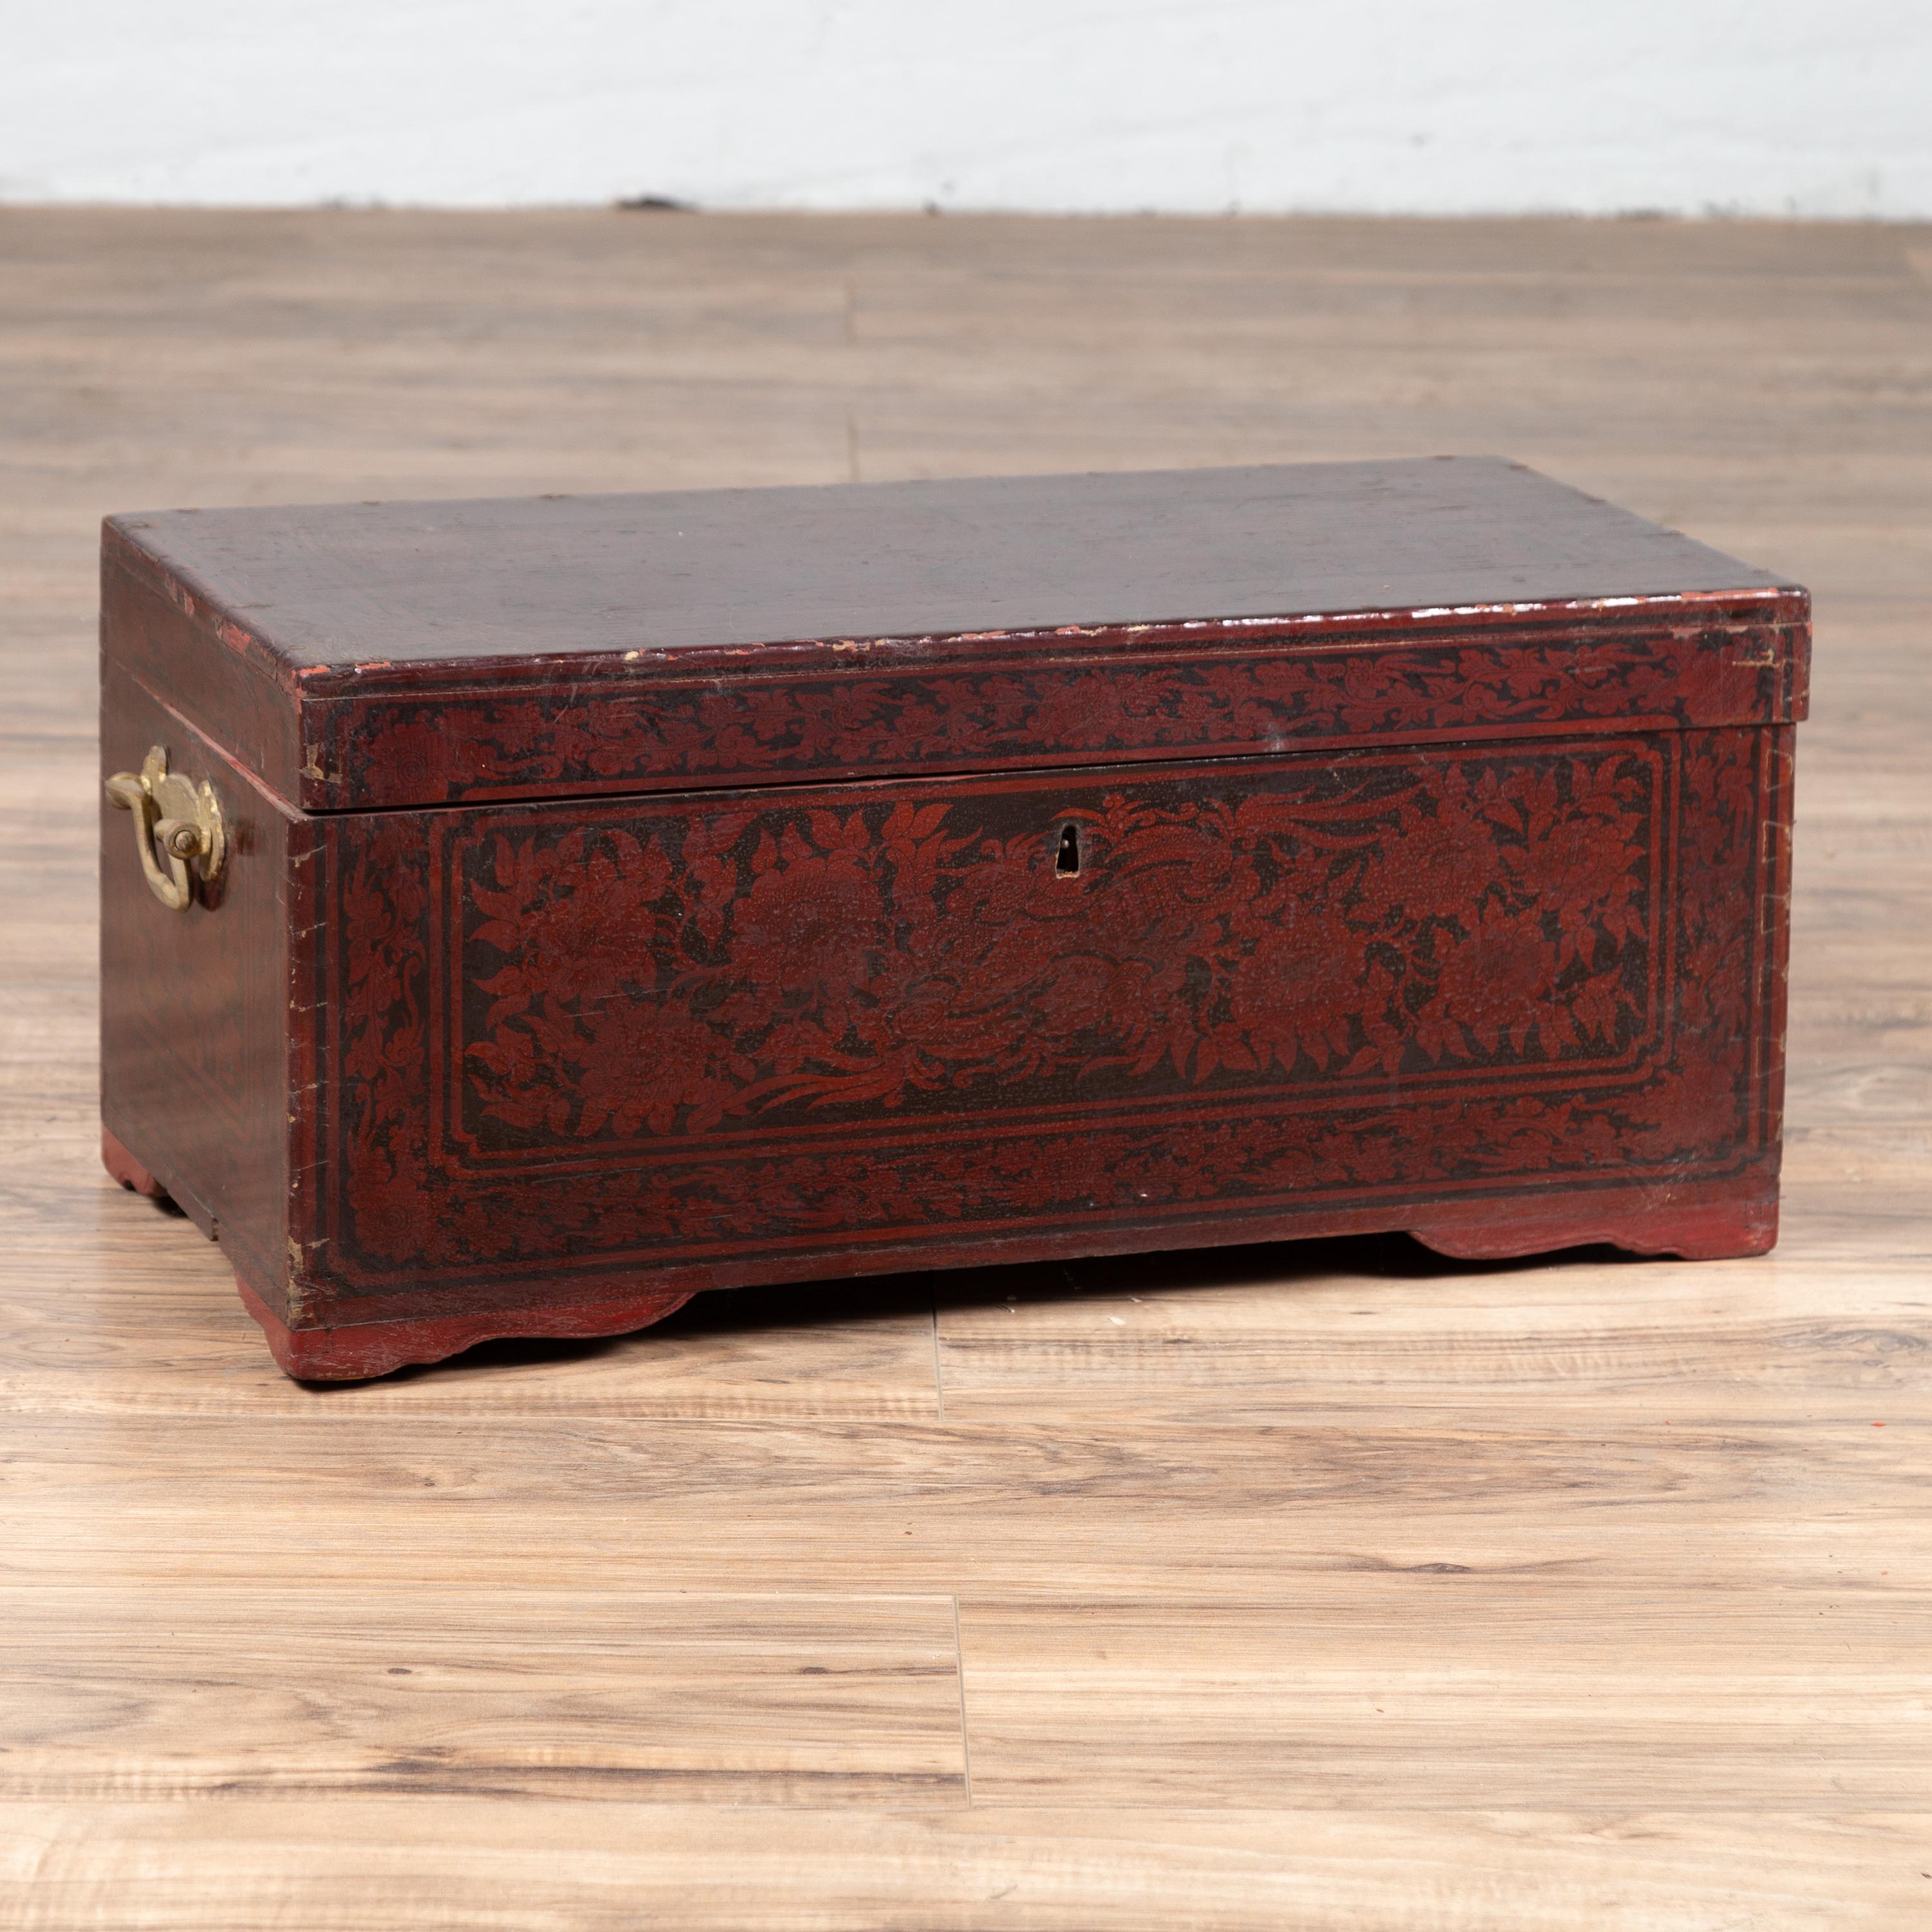 A small vintage Indonesian Palembang lacquered leather chest from the mid-20th century, with burgundy patina. Born in Palembang, southern Sumatra, this exquisite leather chest features a linear silhouette, perfectly complimented by its burgundy